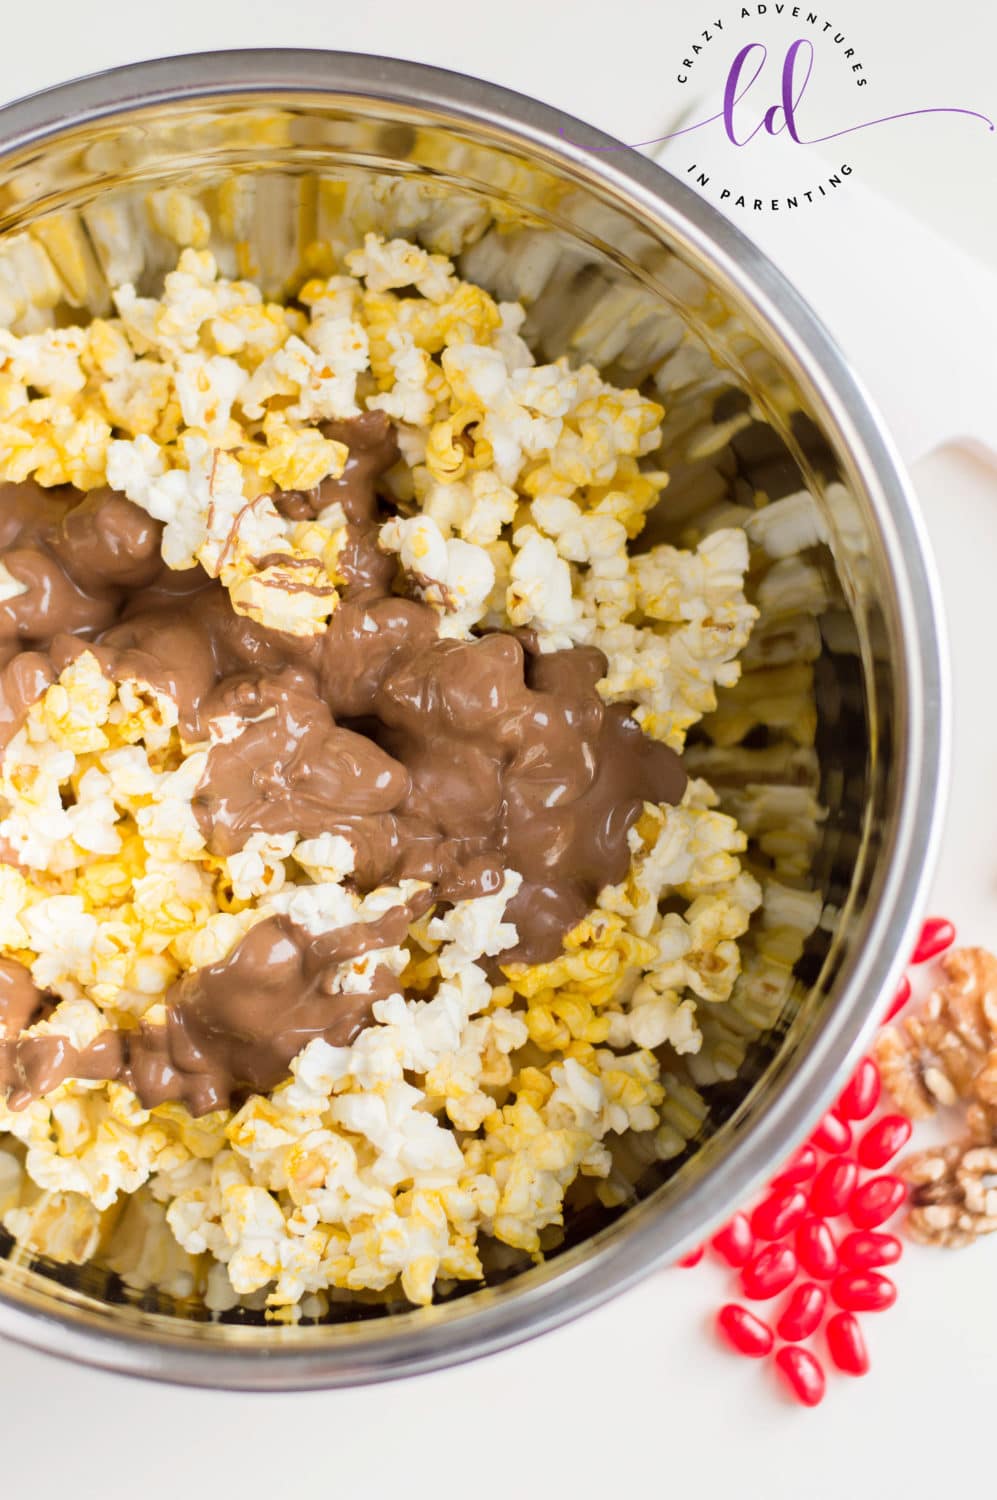 Pour chocolate peanut butter over popped popcorn for Christmas Popcorn Recipe